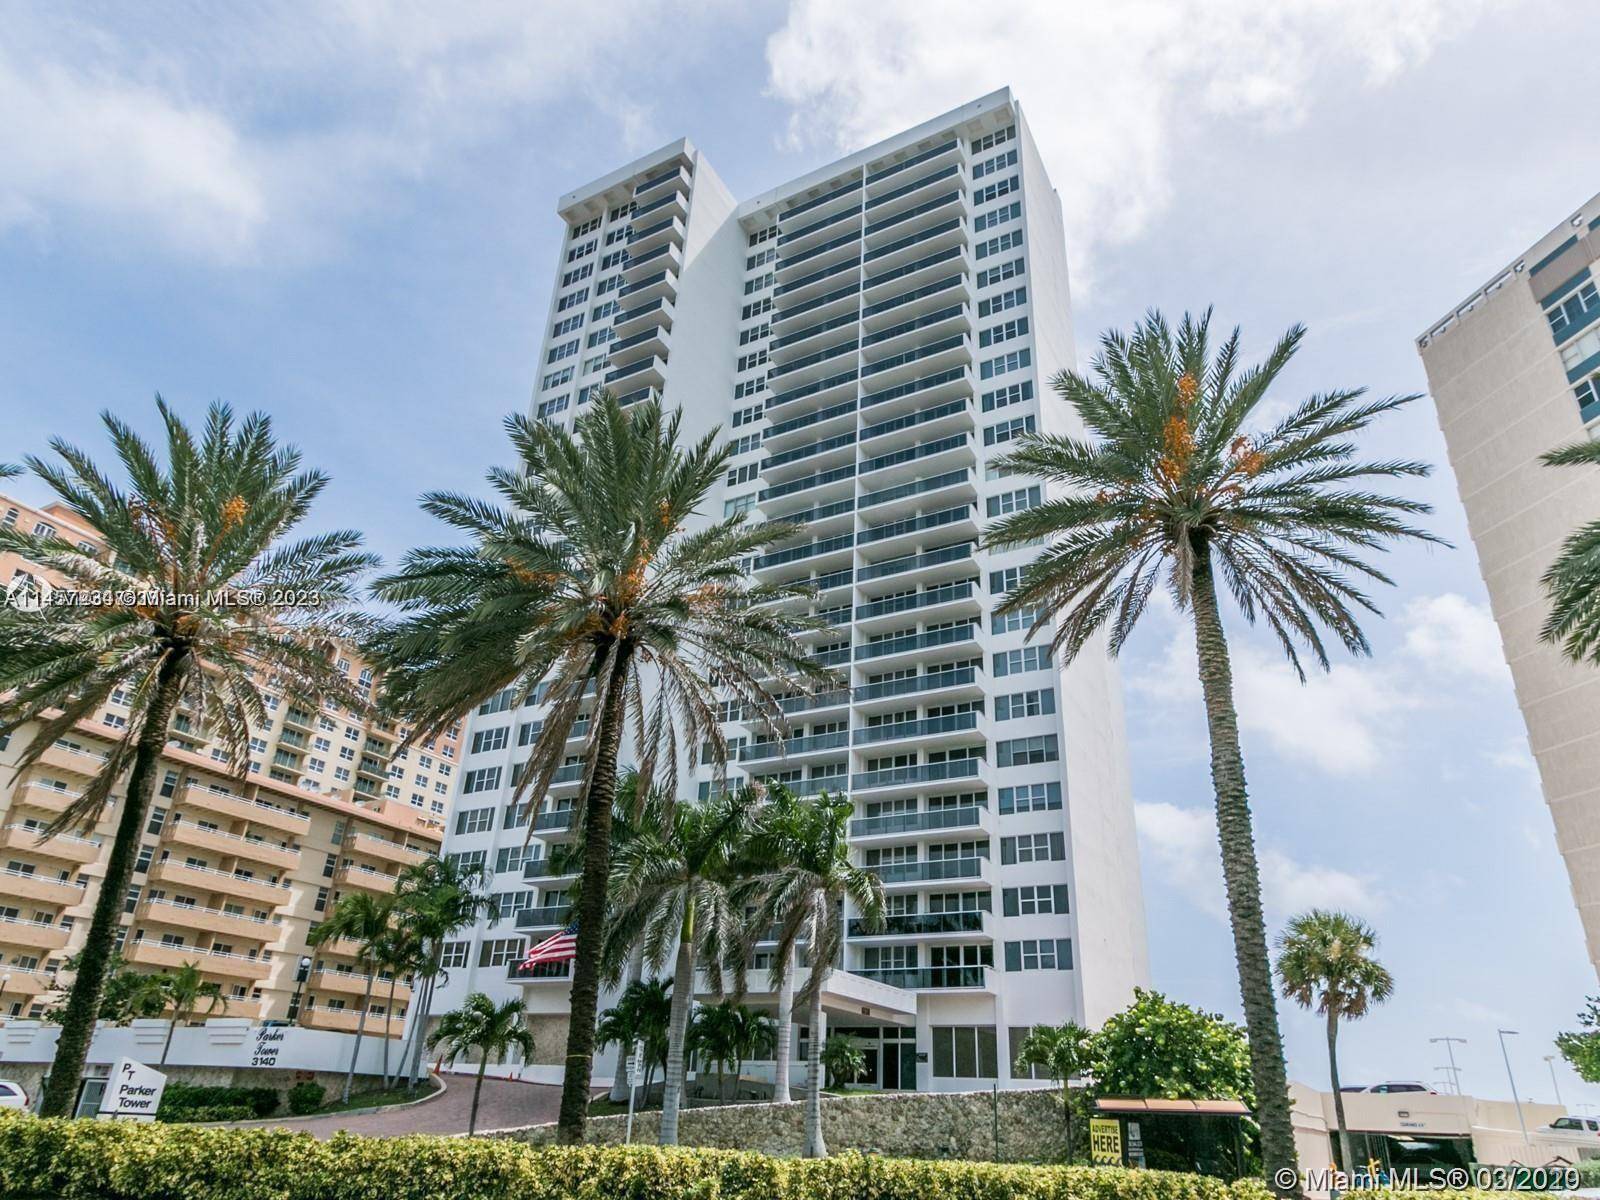 Beautiful 2 BR 2 BATH condo unit with direct ocean views at the fabulous Parker Tower Condo.